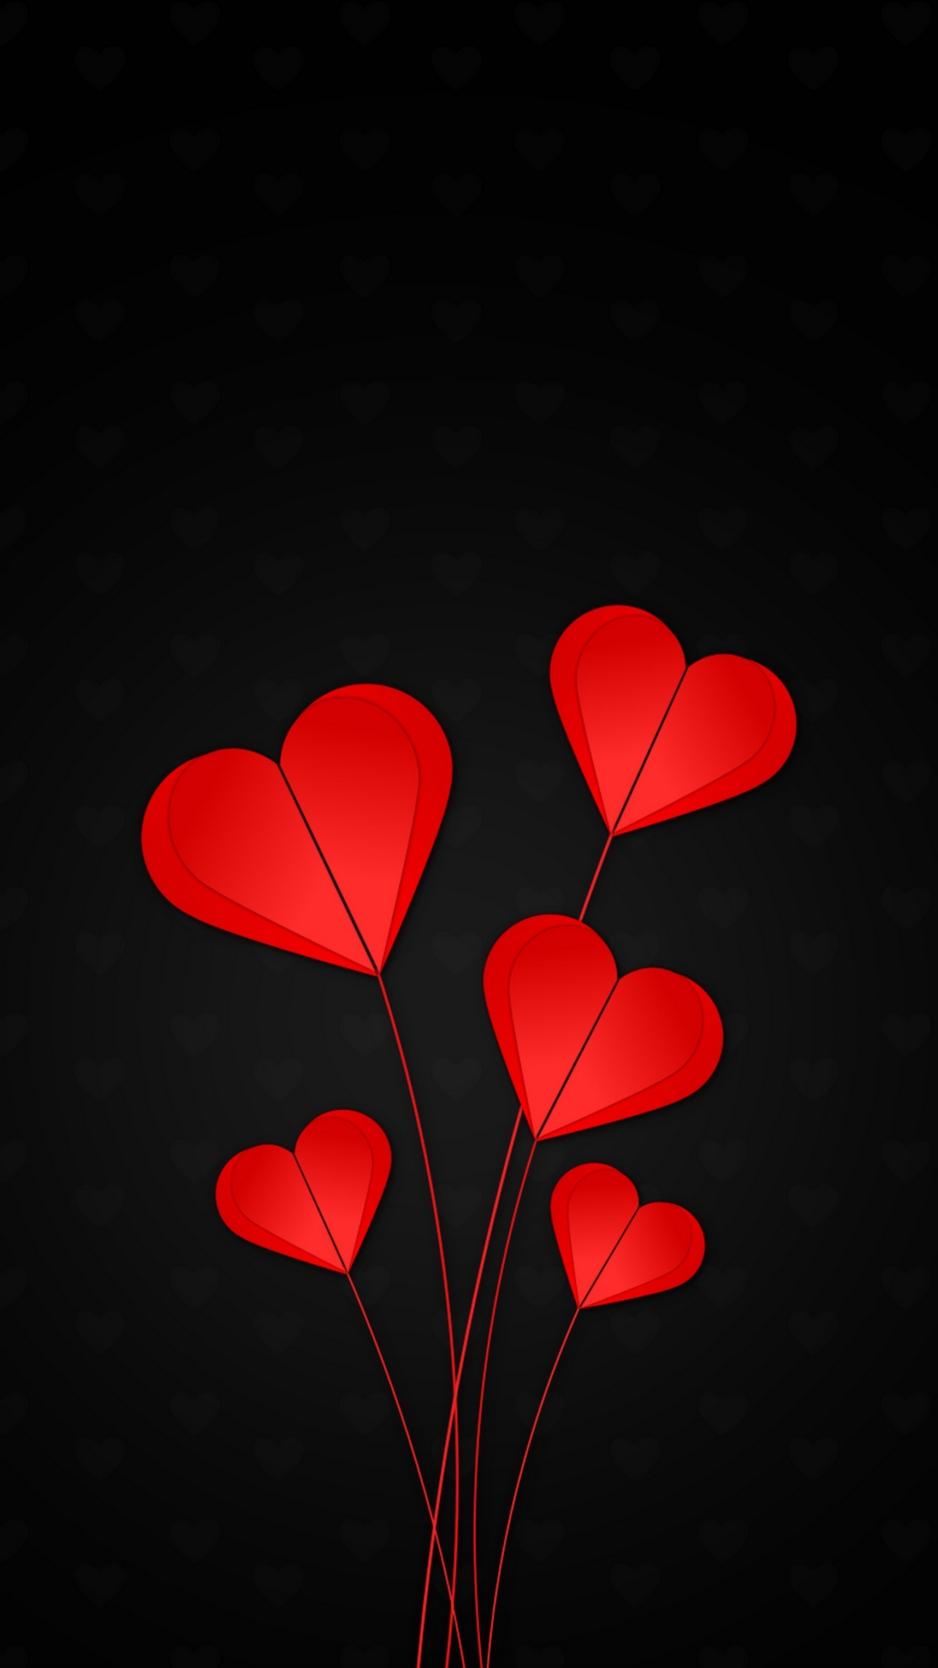 Download wallpaper 938x1668 hearts, red, black background